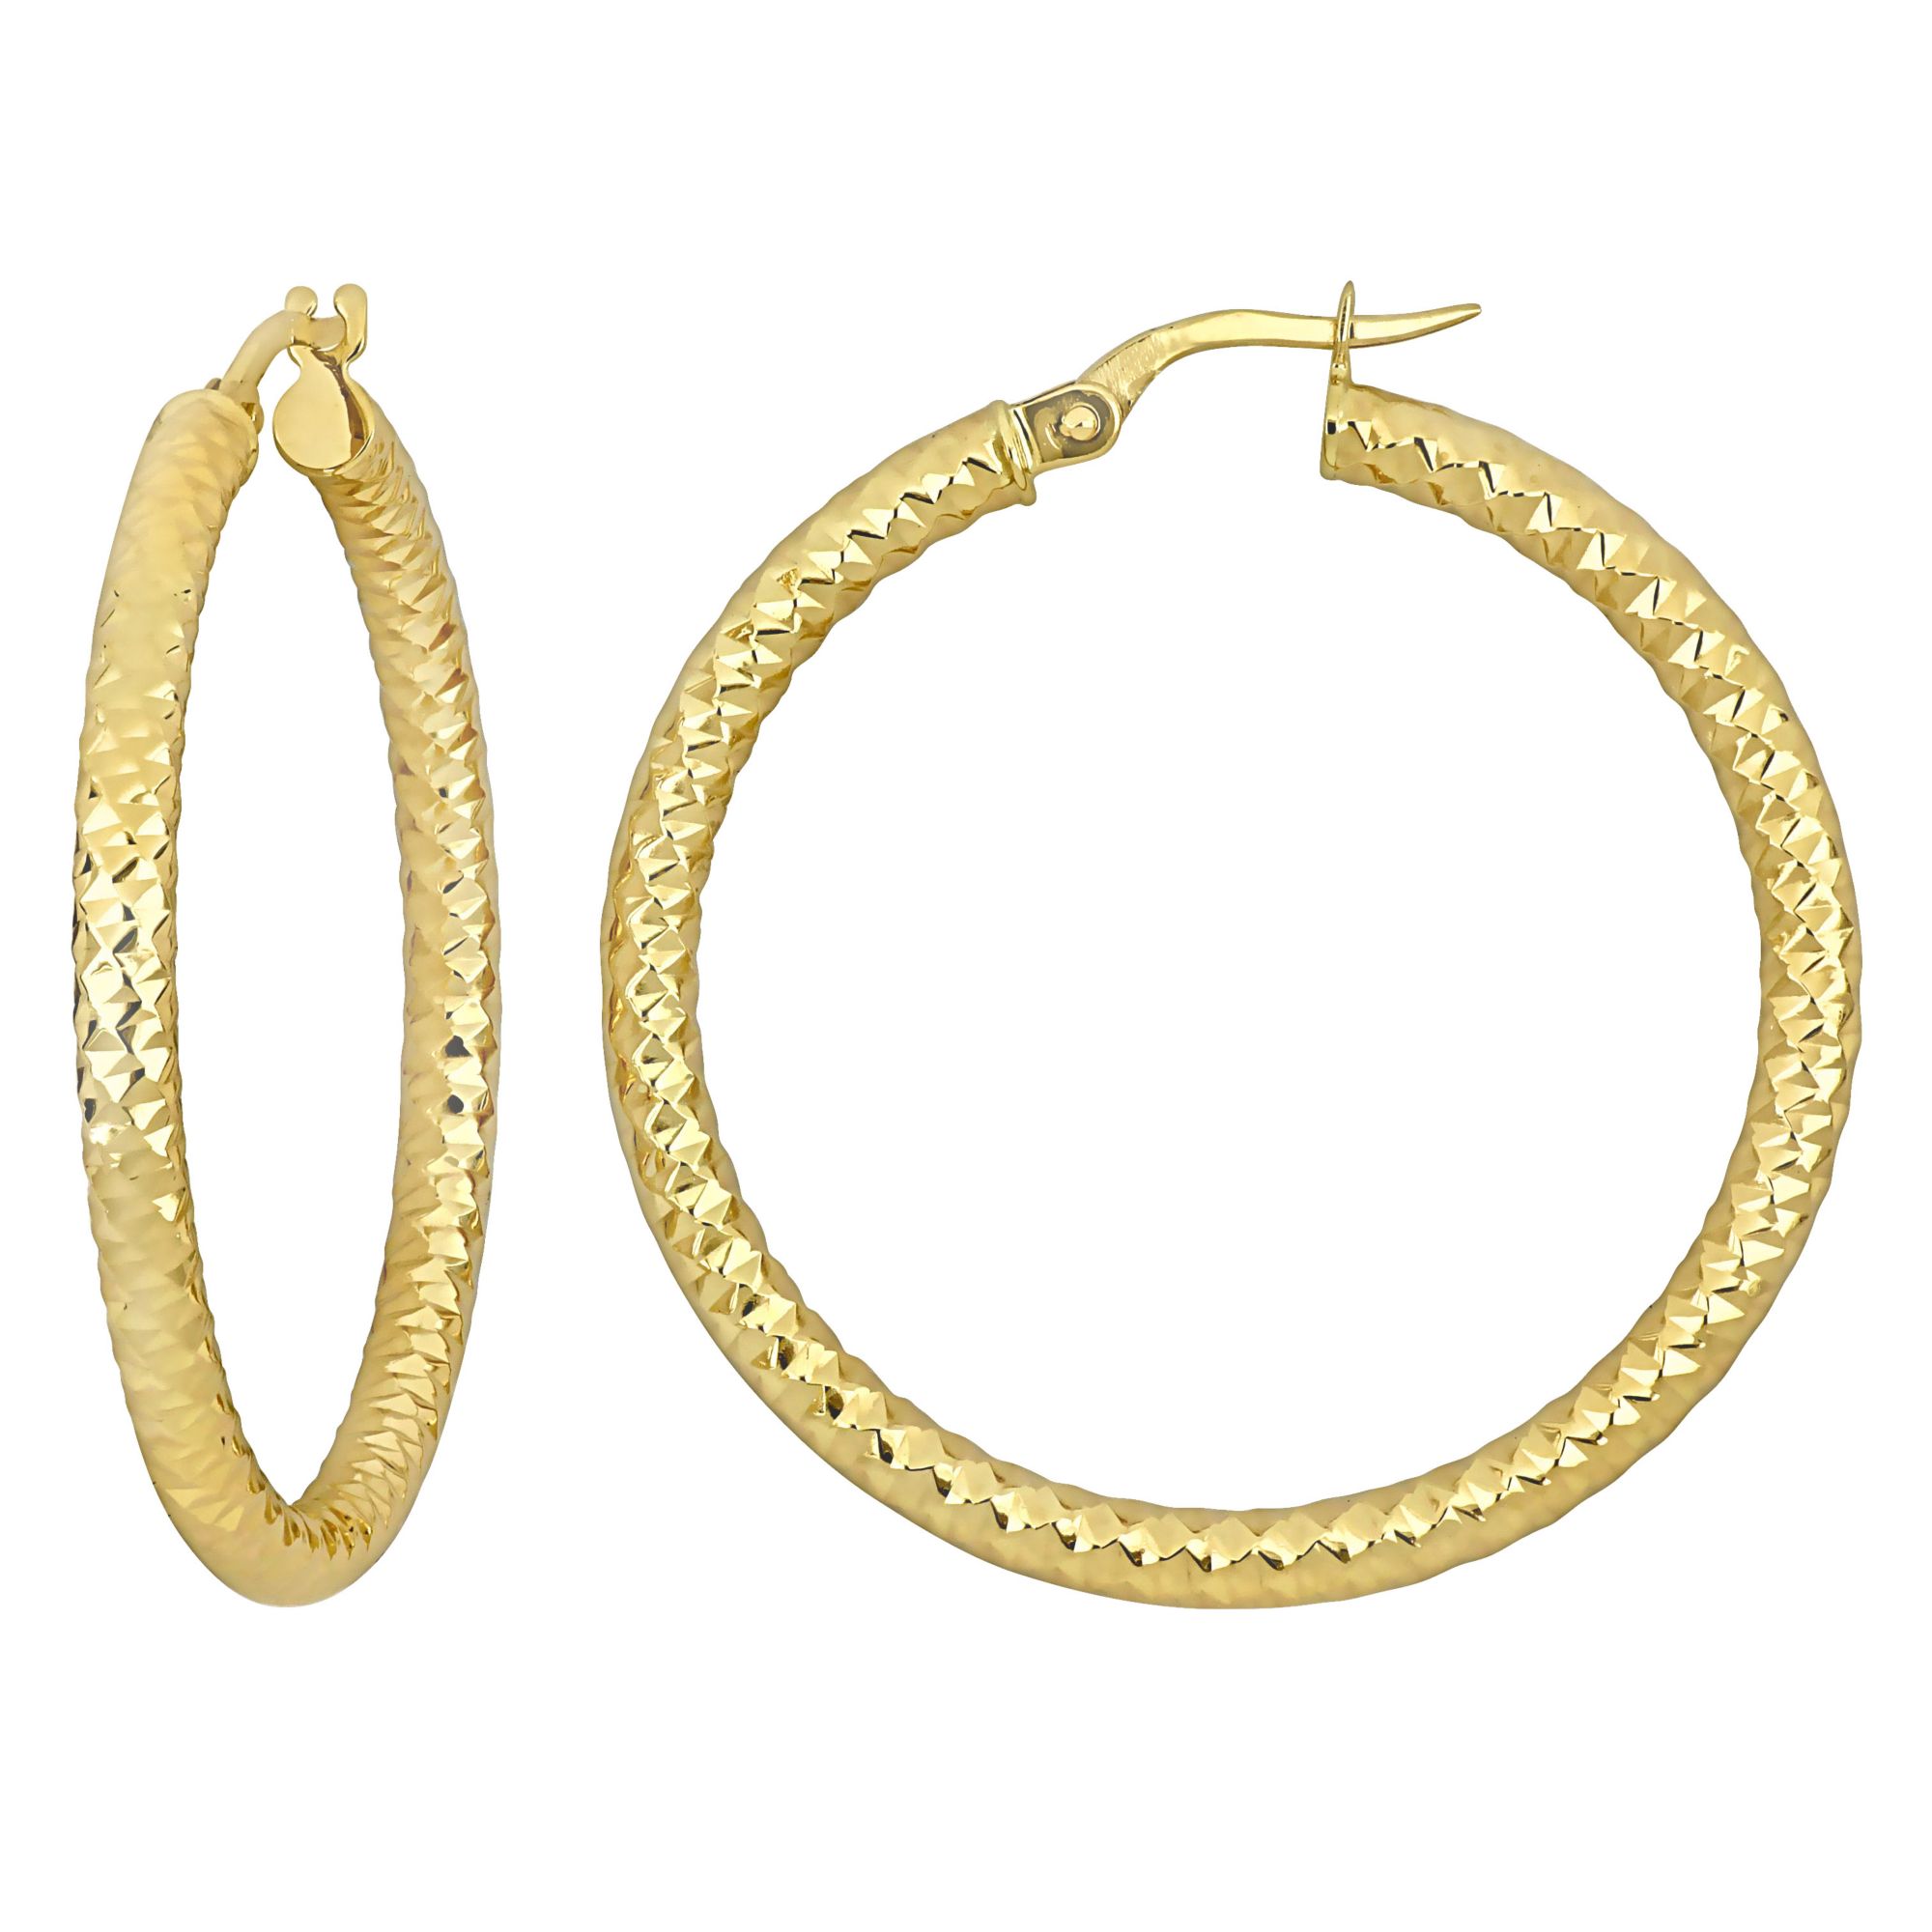 Earring Backs Heavy Weight 14k Yellow Gold (Pair)